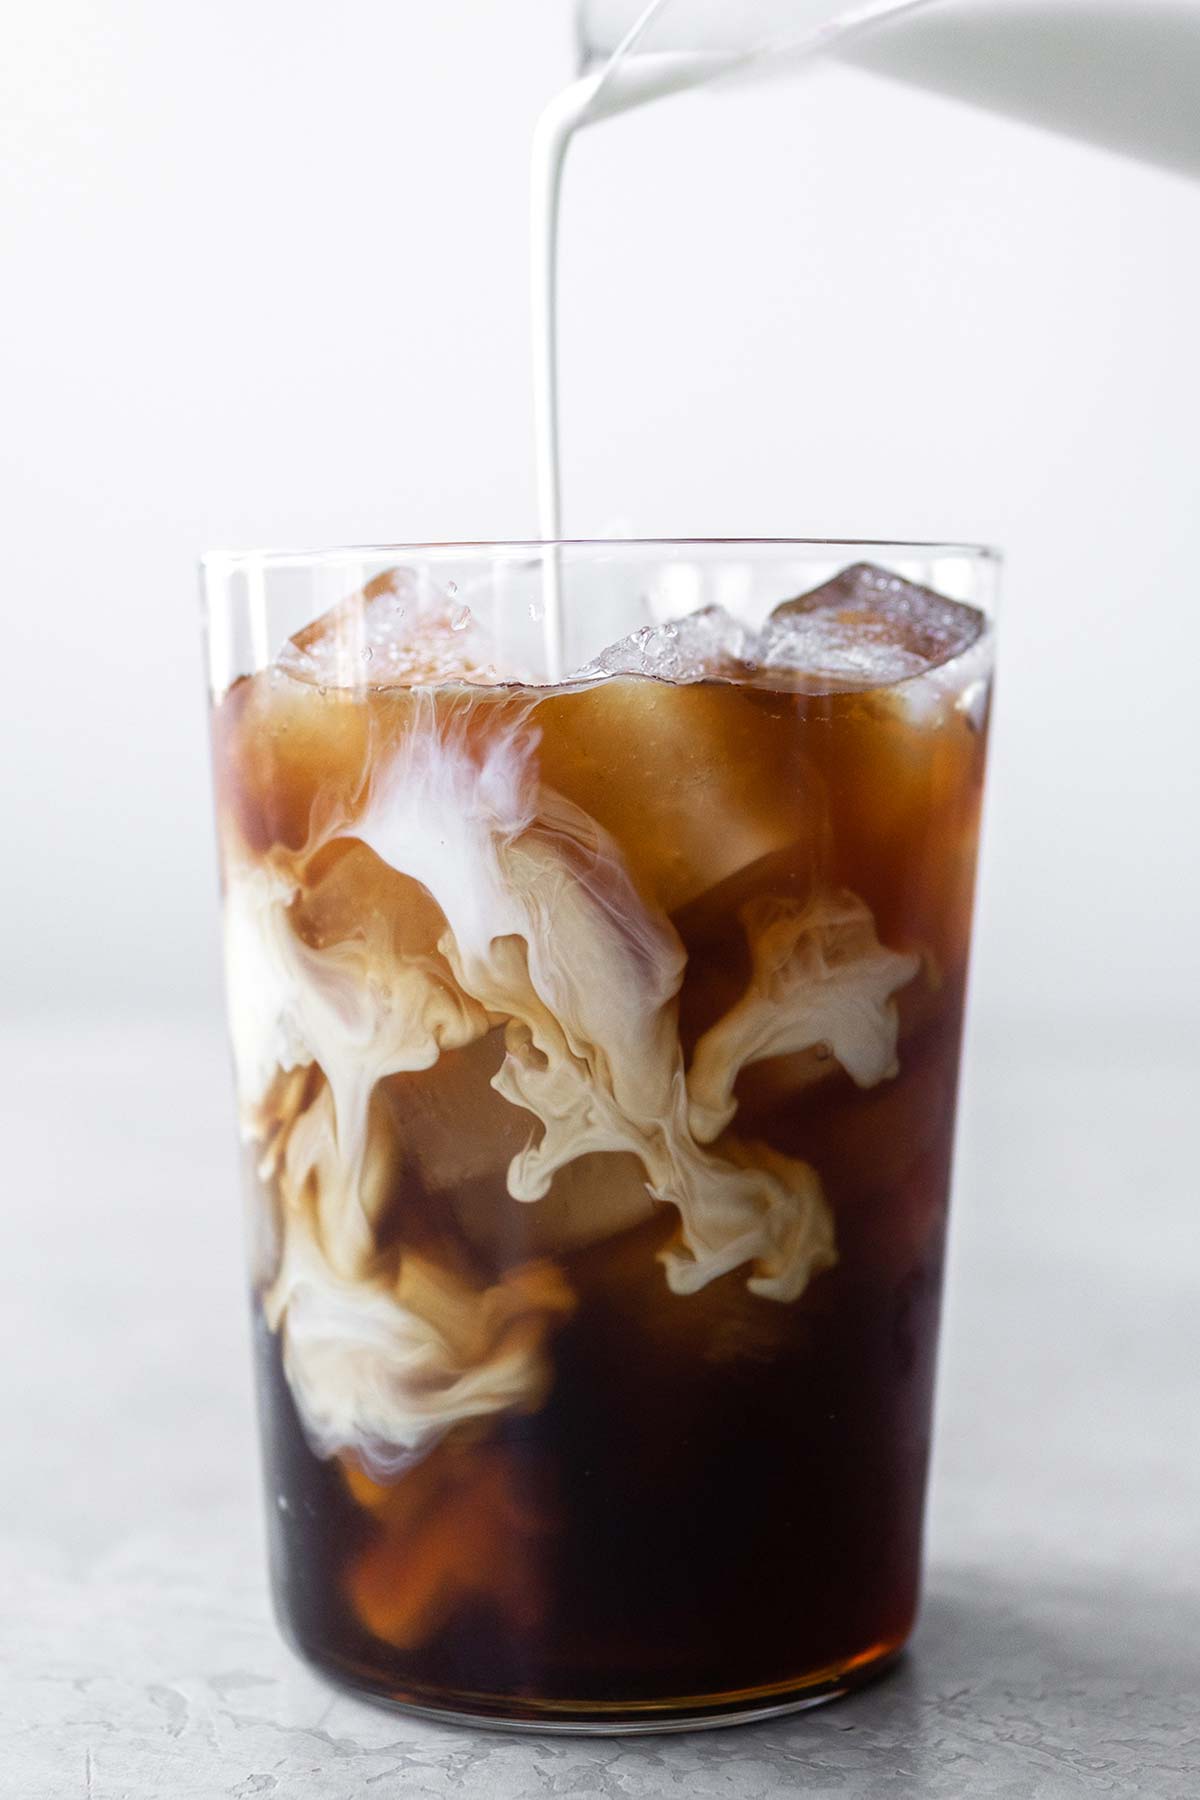 Pouring half & half into a cup of iced coffee.